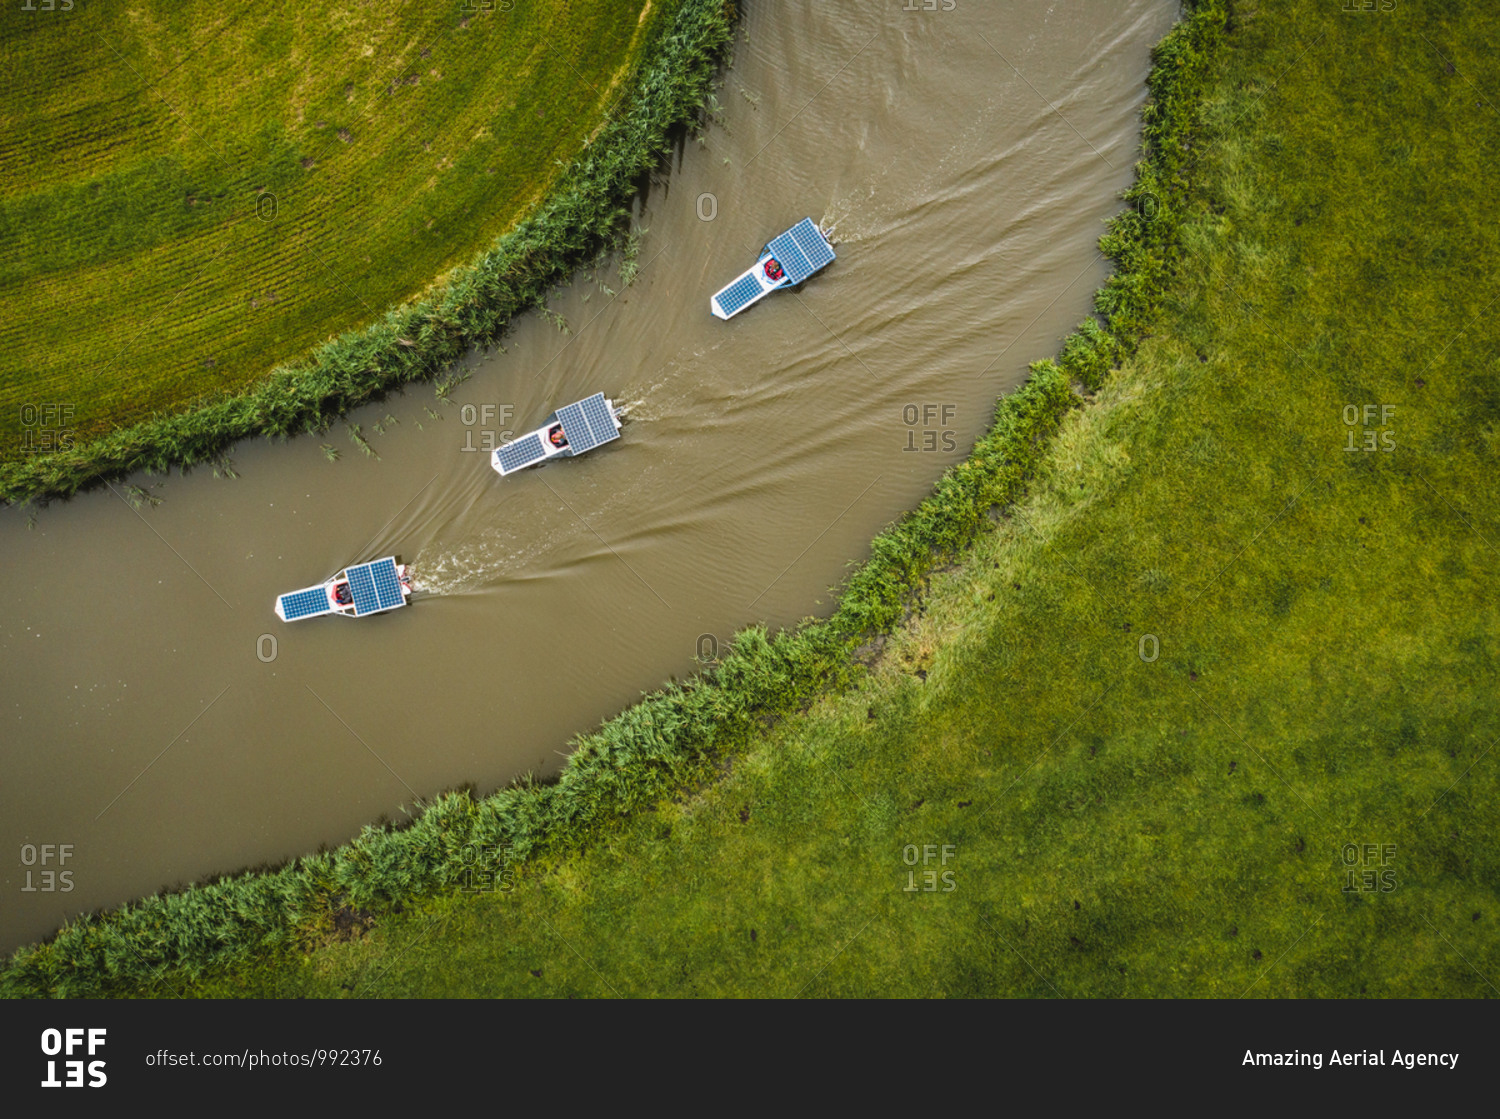 Aerial view of solar panel boats navigating through the farmlands of Schettens, Friesland, The Netherlands.